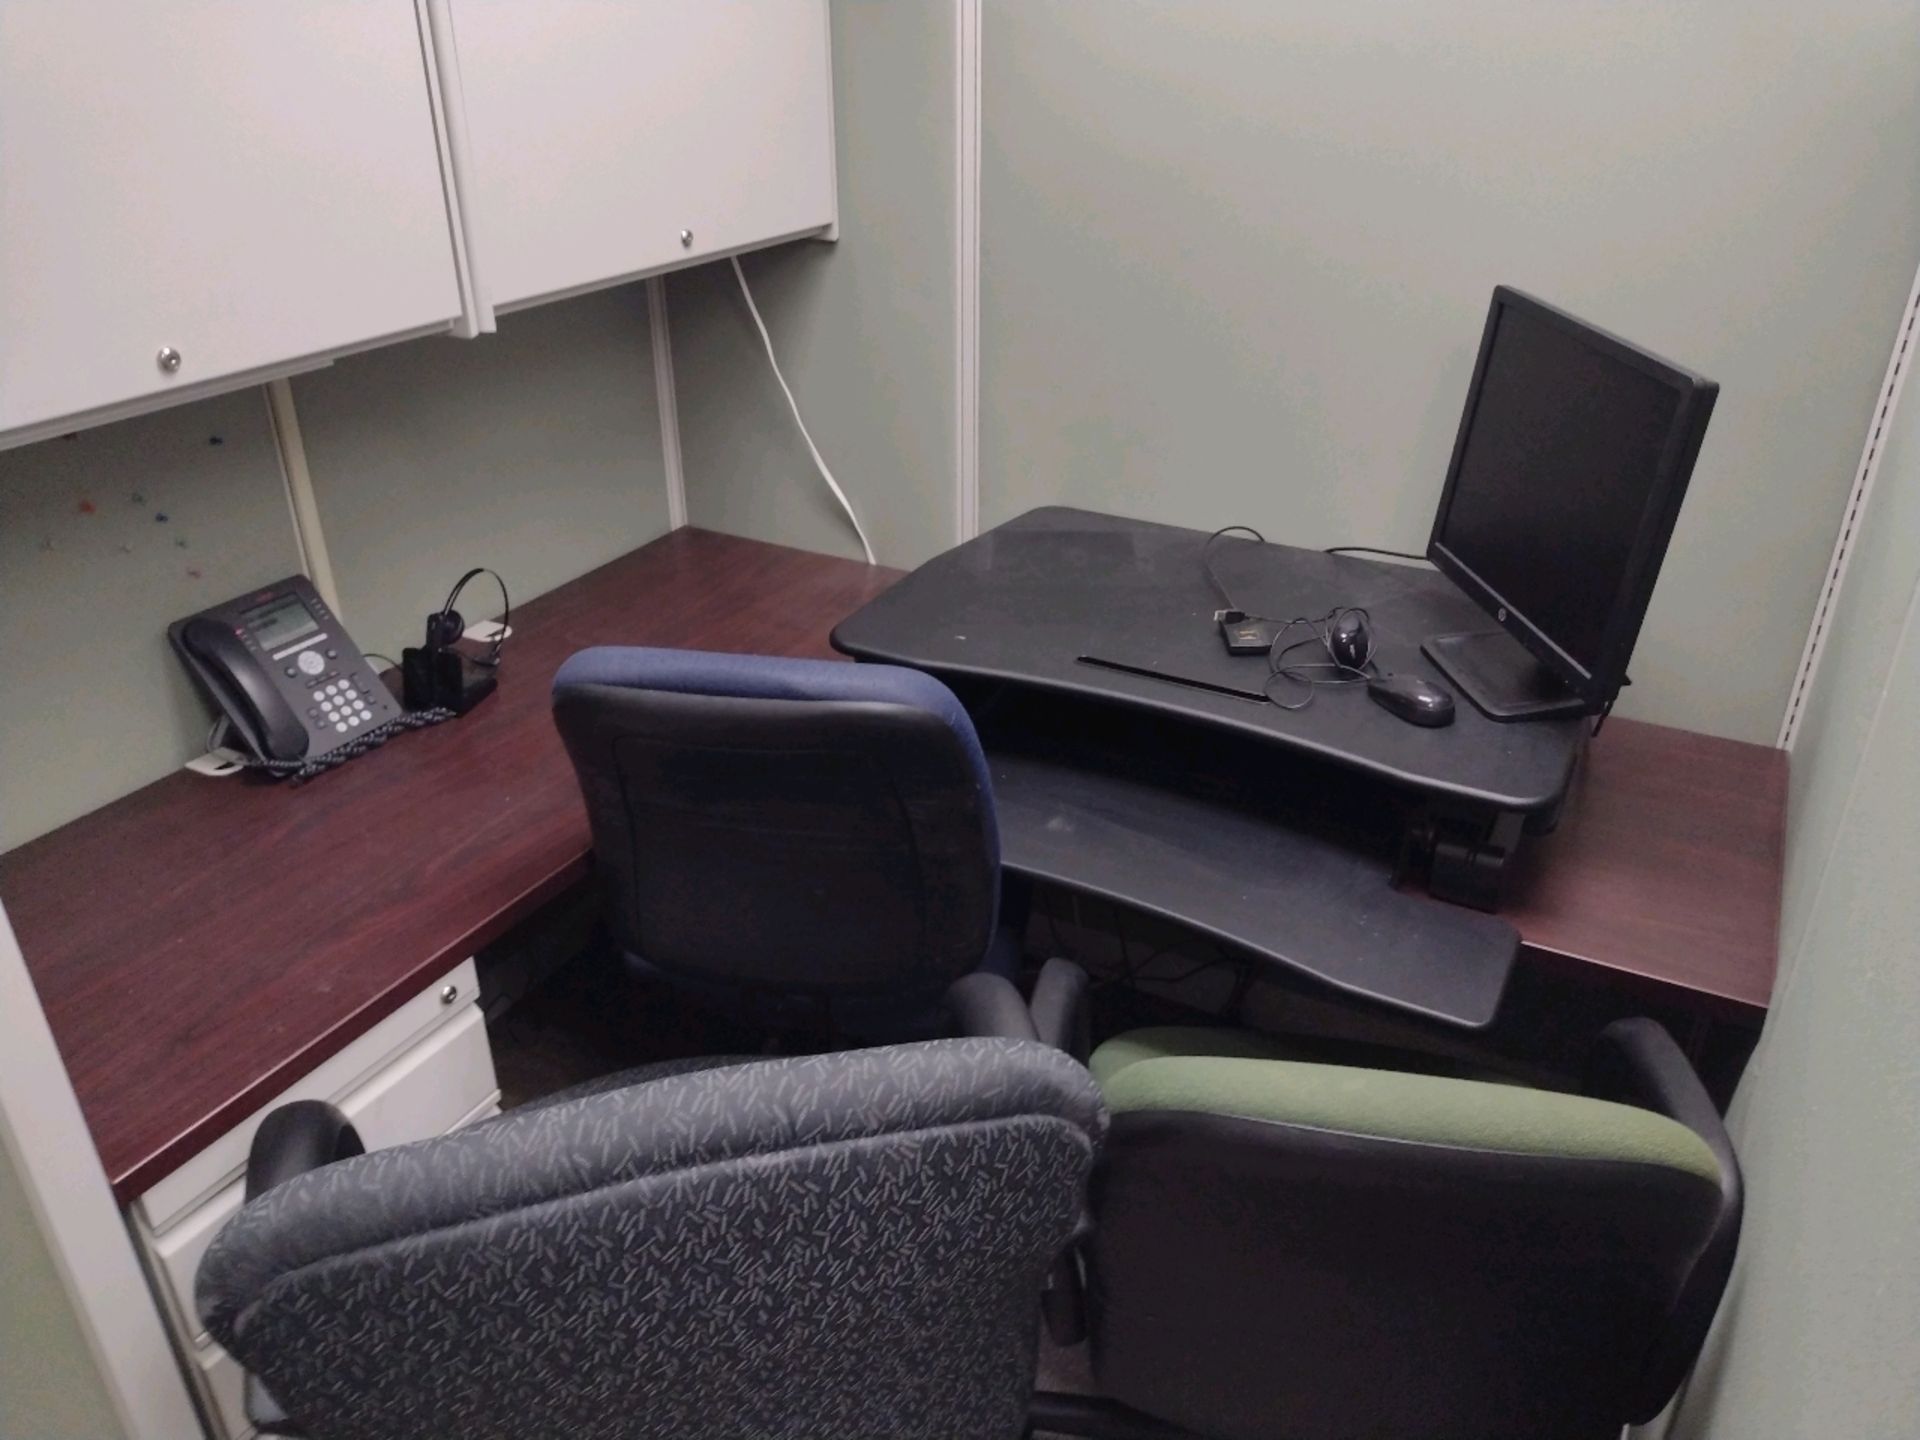 OFFICE SUITE TO INCLUDE: 8 WORK STATION MODULAR CUBICLE SYSTEM WITH CHAIRS, PRINTERS, MONITORS, - Image 13 of 16